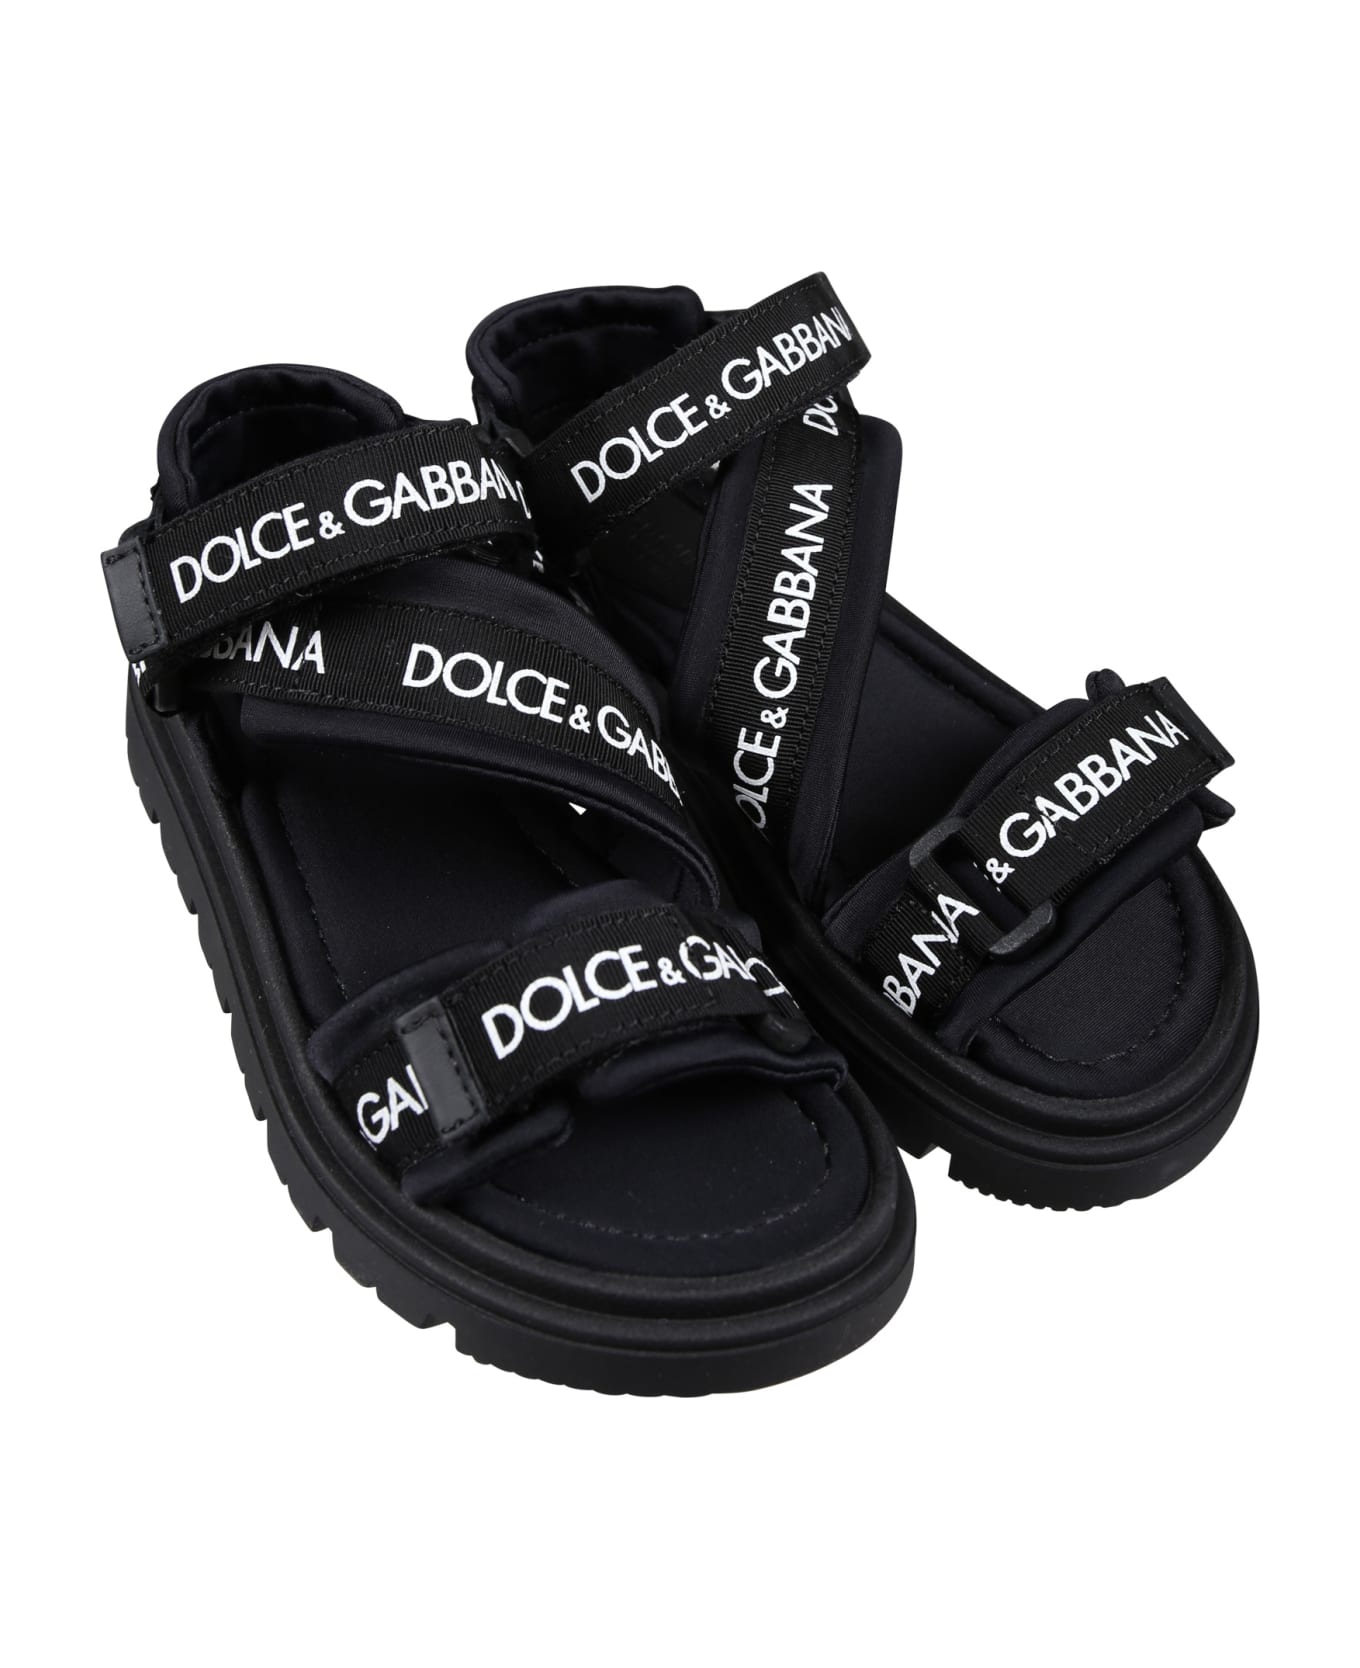 Dolce & Gabbana Black Sandals For Girl With Logo - Nero